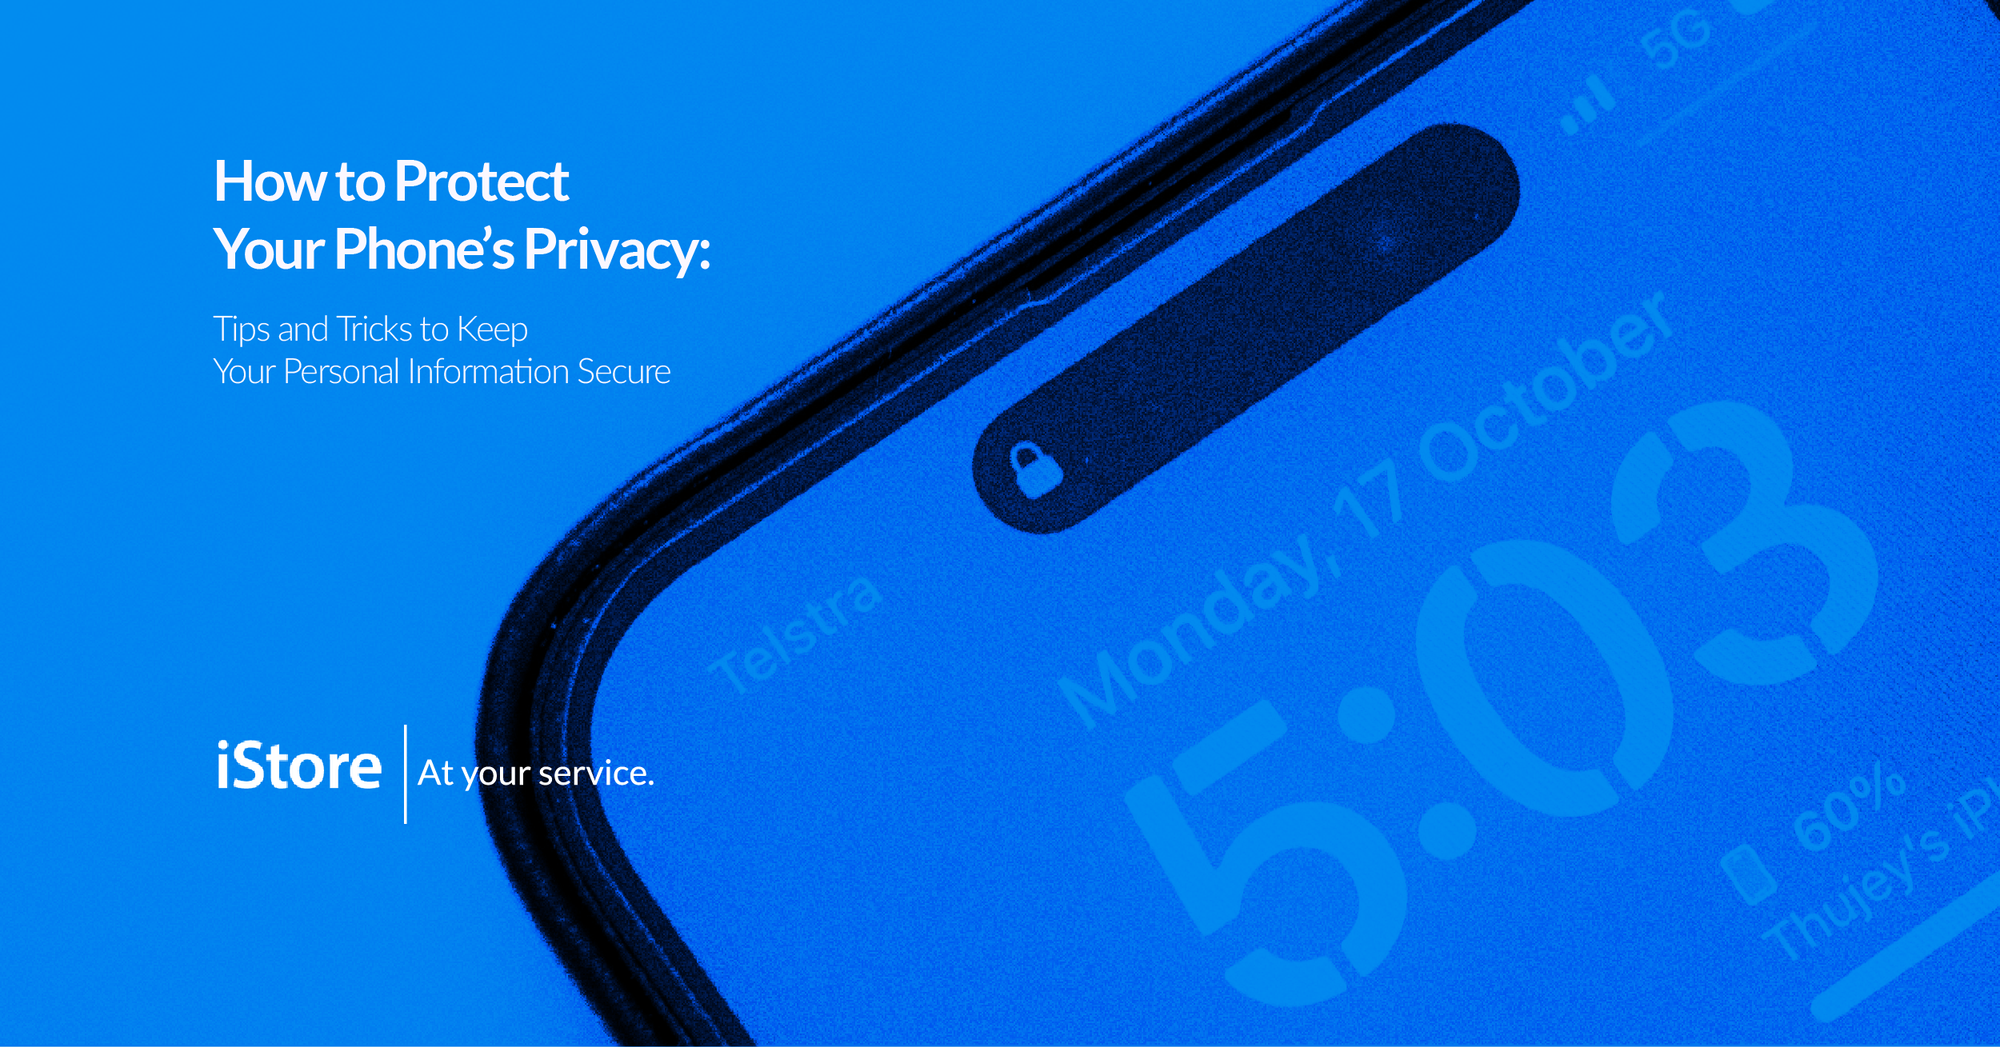 How to Protect Your Phone Privacy: Tips and Tricks to Keep Your Personal Information Secure